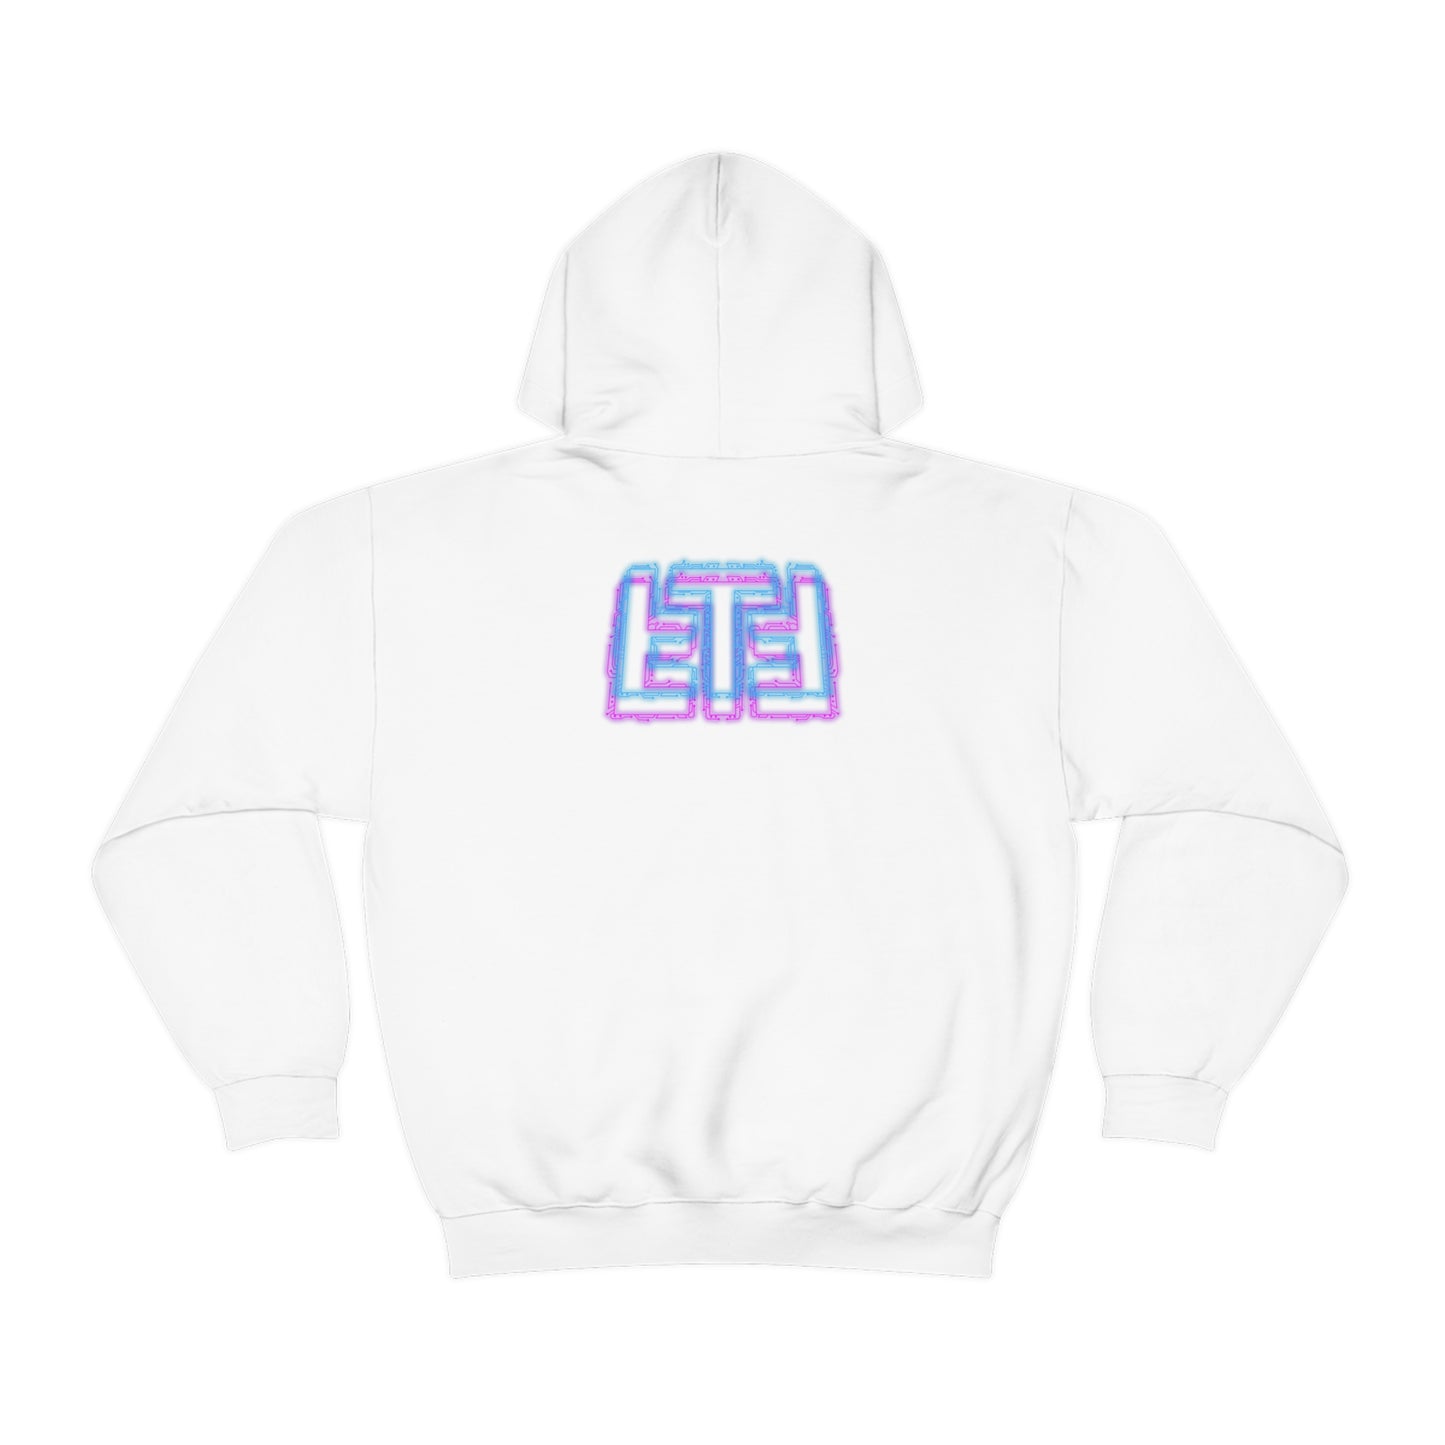 Tabletop Time Cyberpunk Pull Over Hoodie